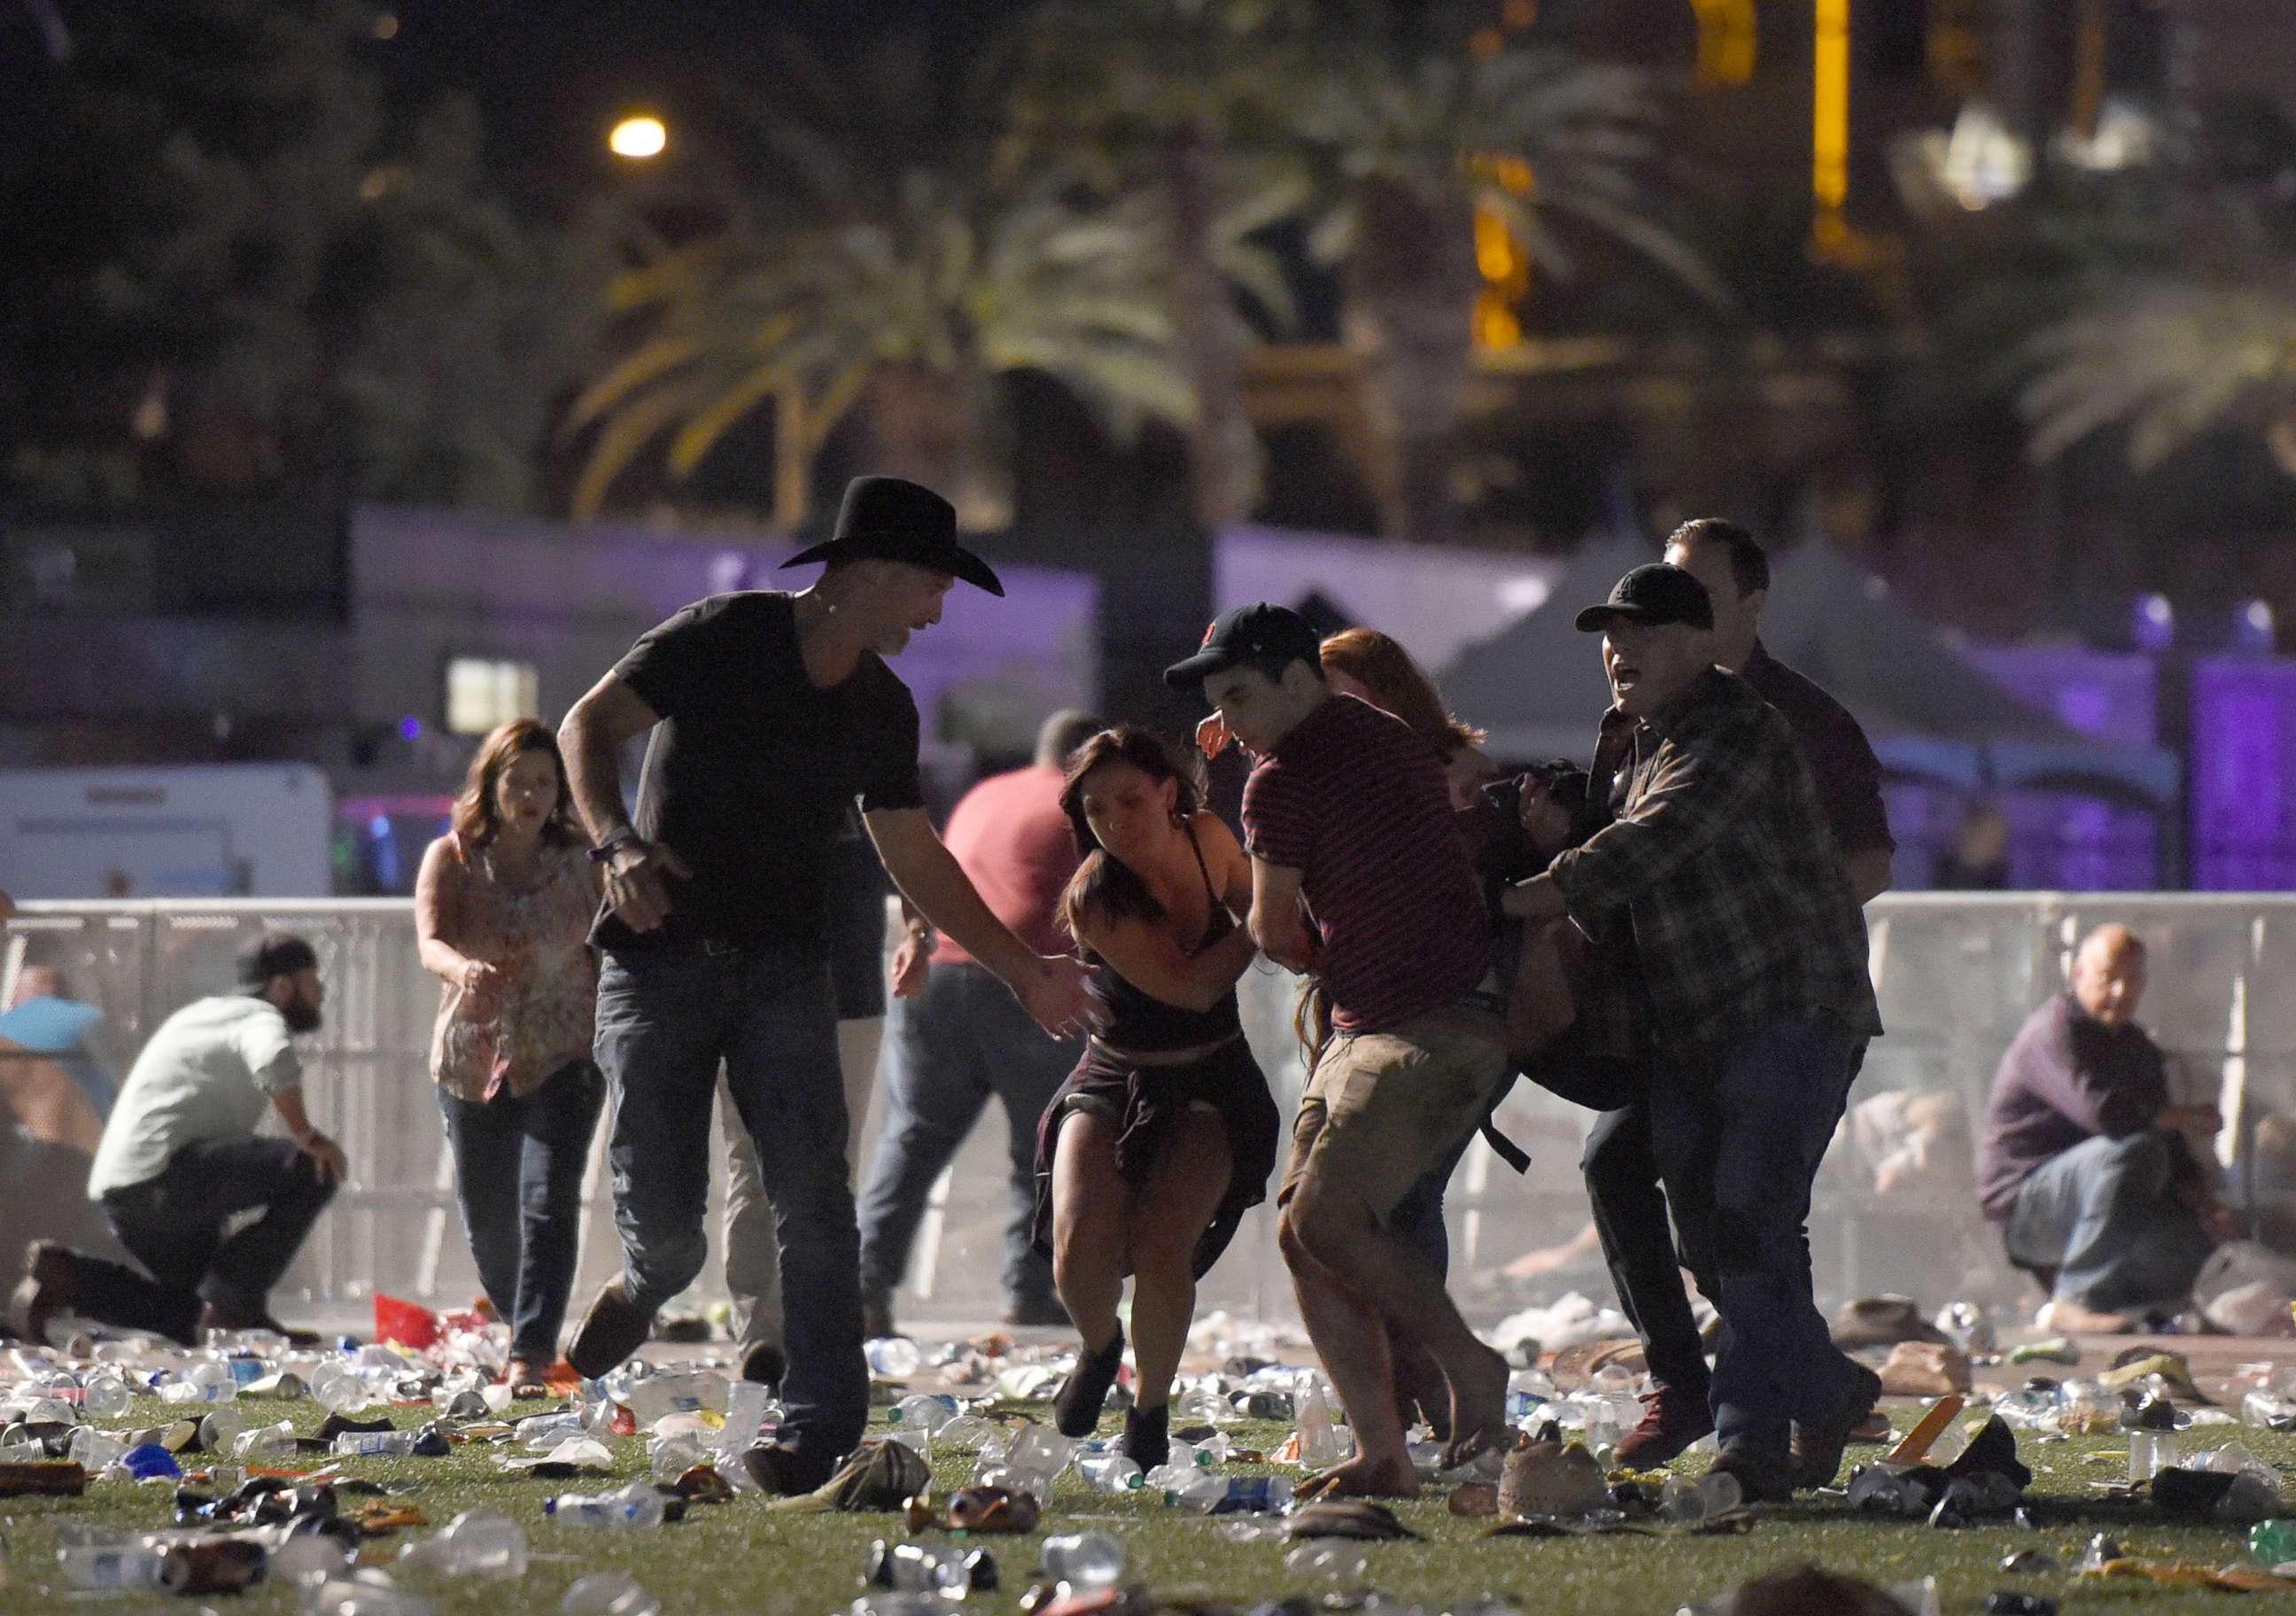 PHOTO: People carry a an injured person at the Route 91 Harvest country music festival after gun fire was heard, Oct. 1, 2017 in Las Vegas.